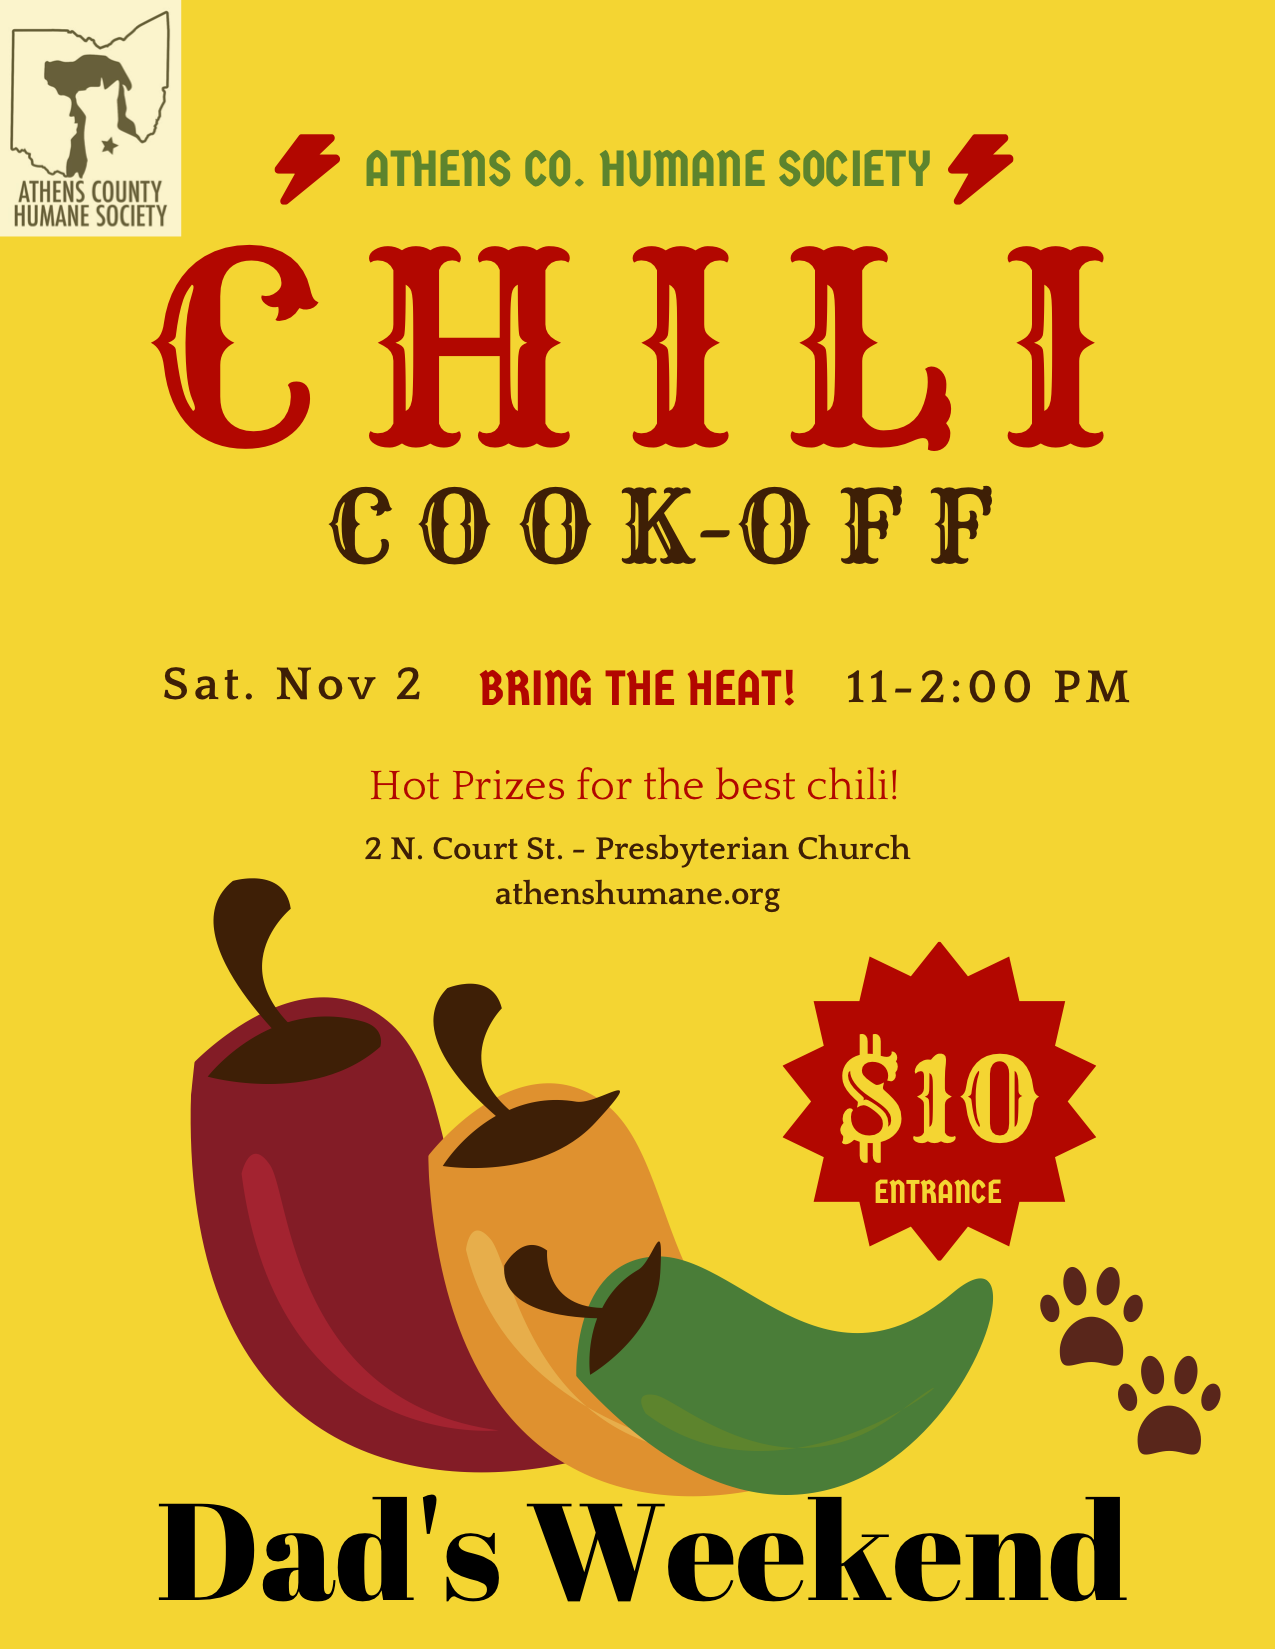 Chili Cook-Off flier